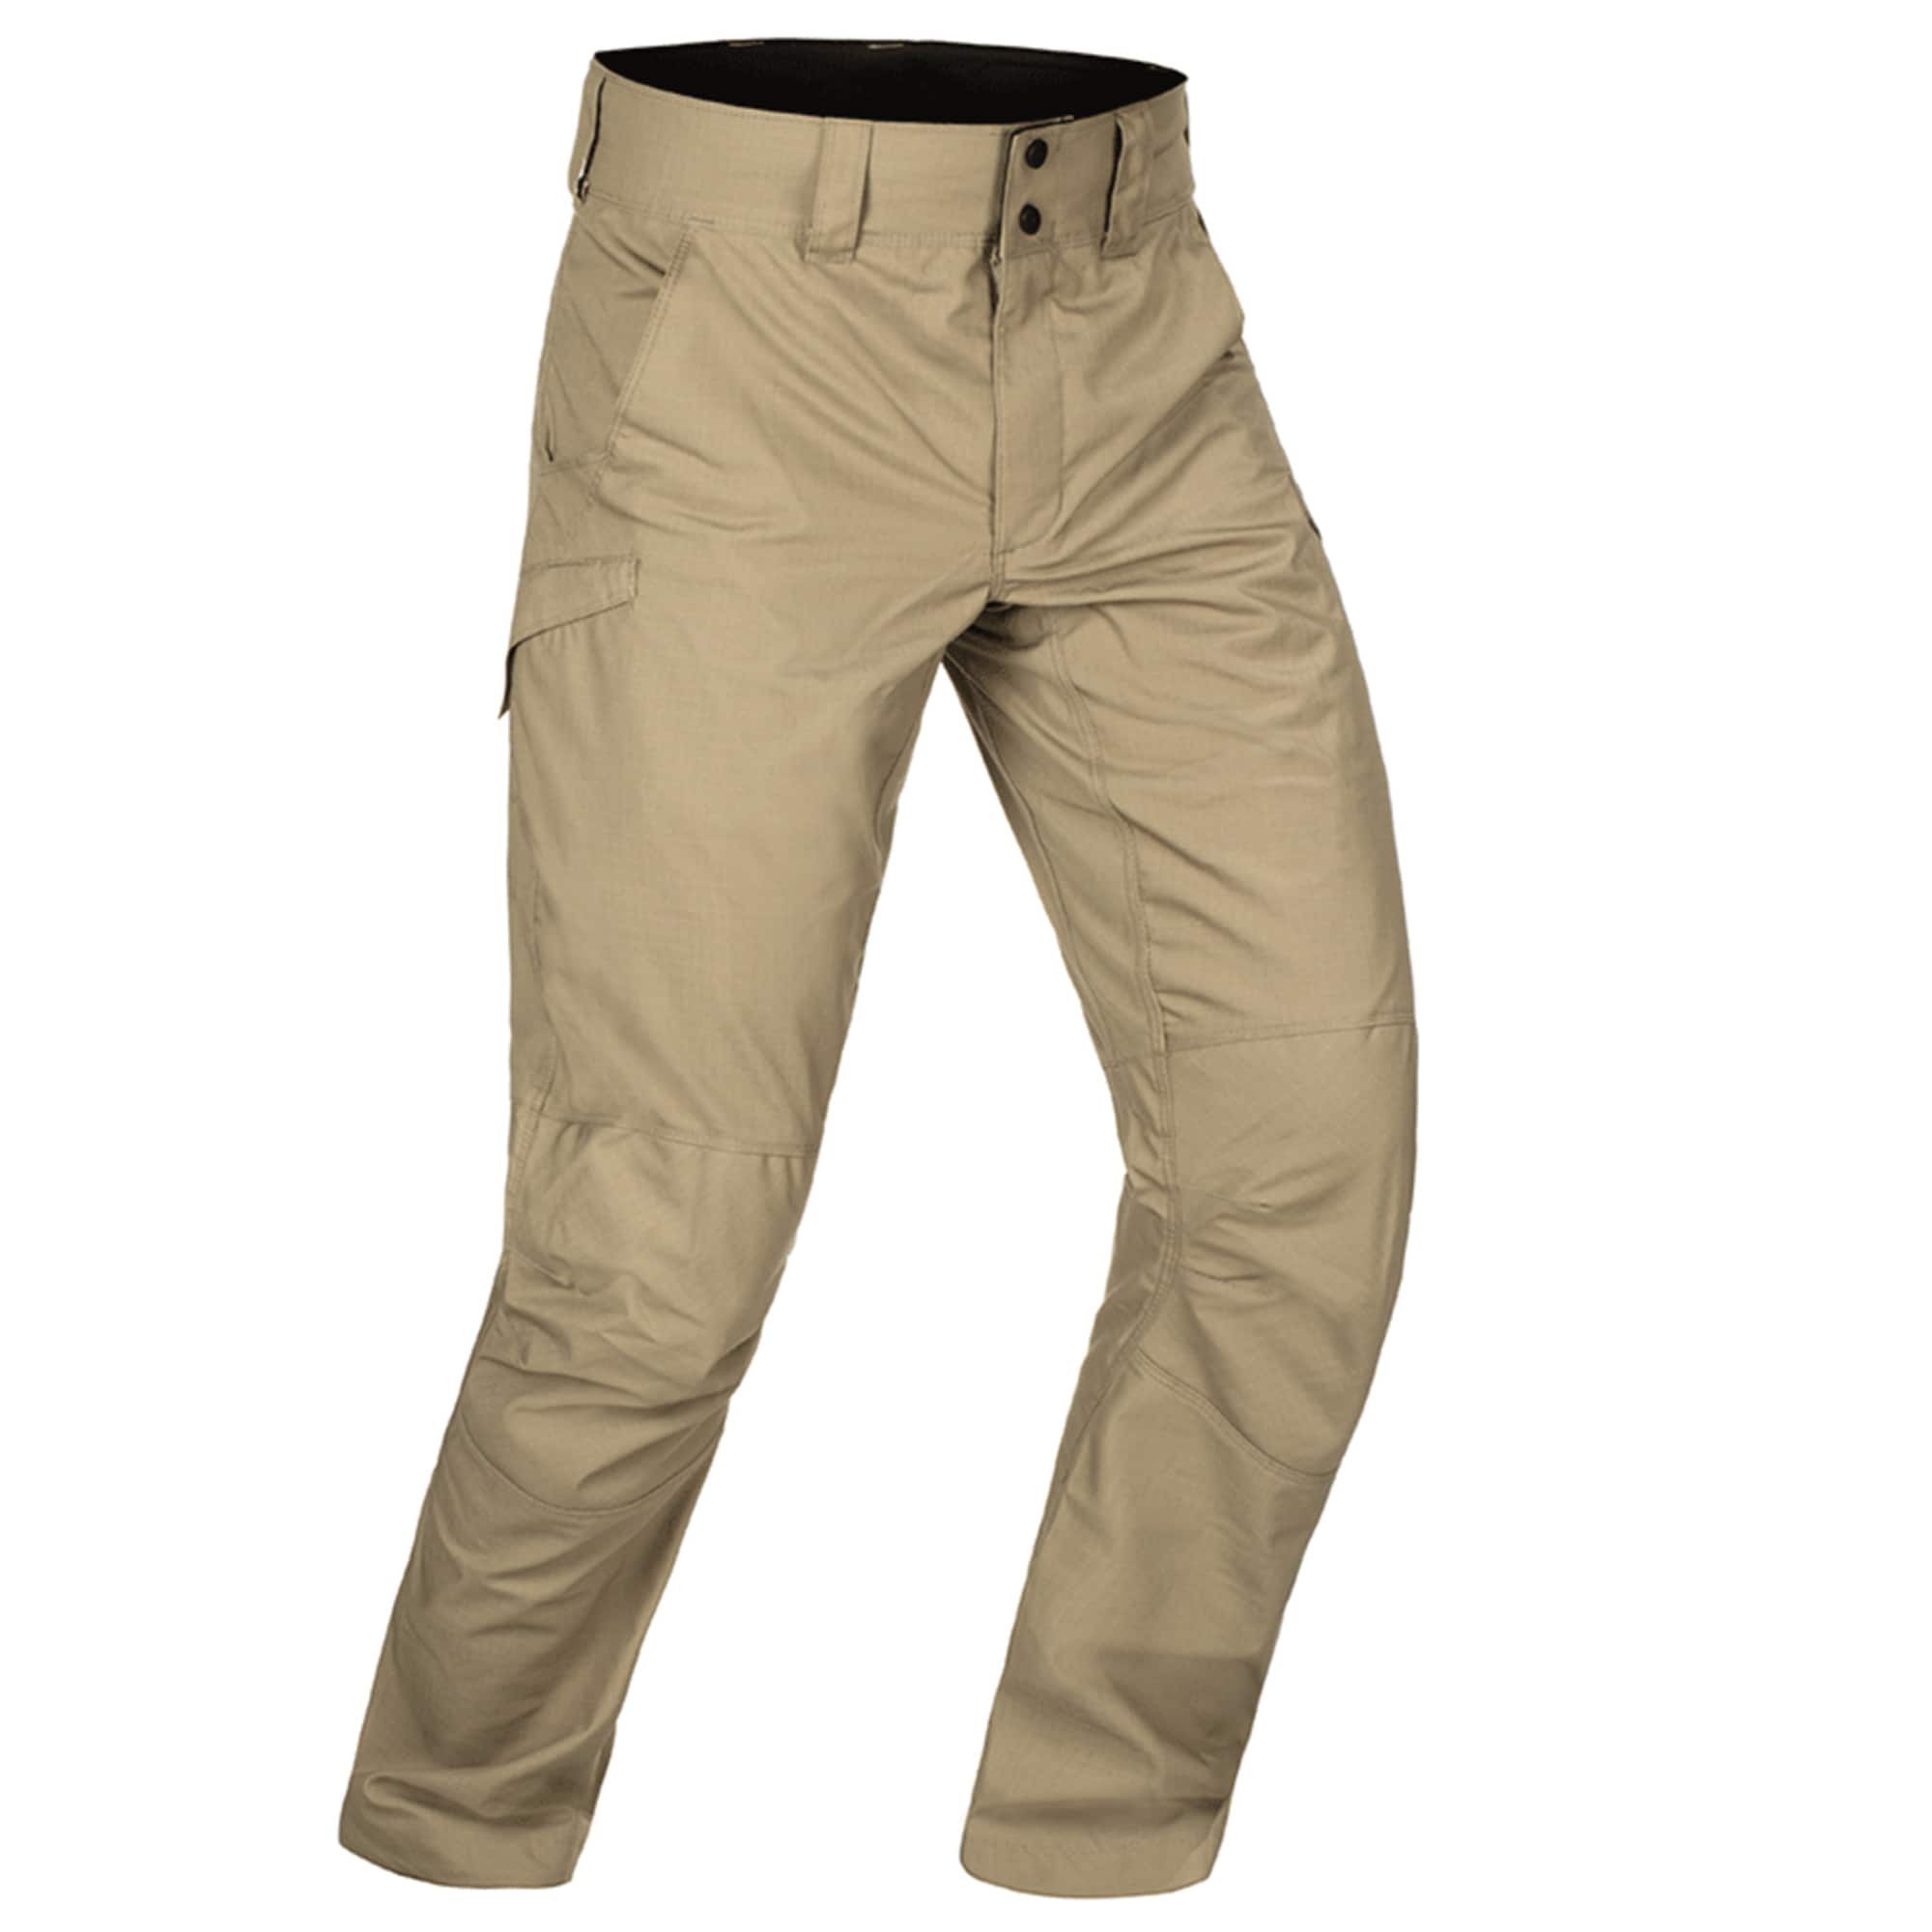 Purchase the Clawgear Tactical Pant Defiant Flex coyote by ASMC